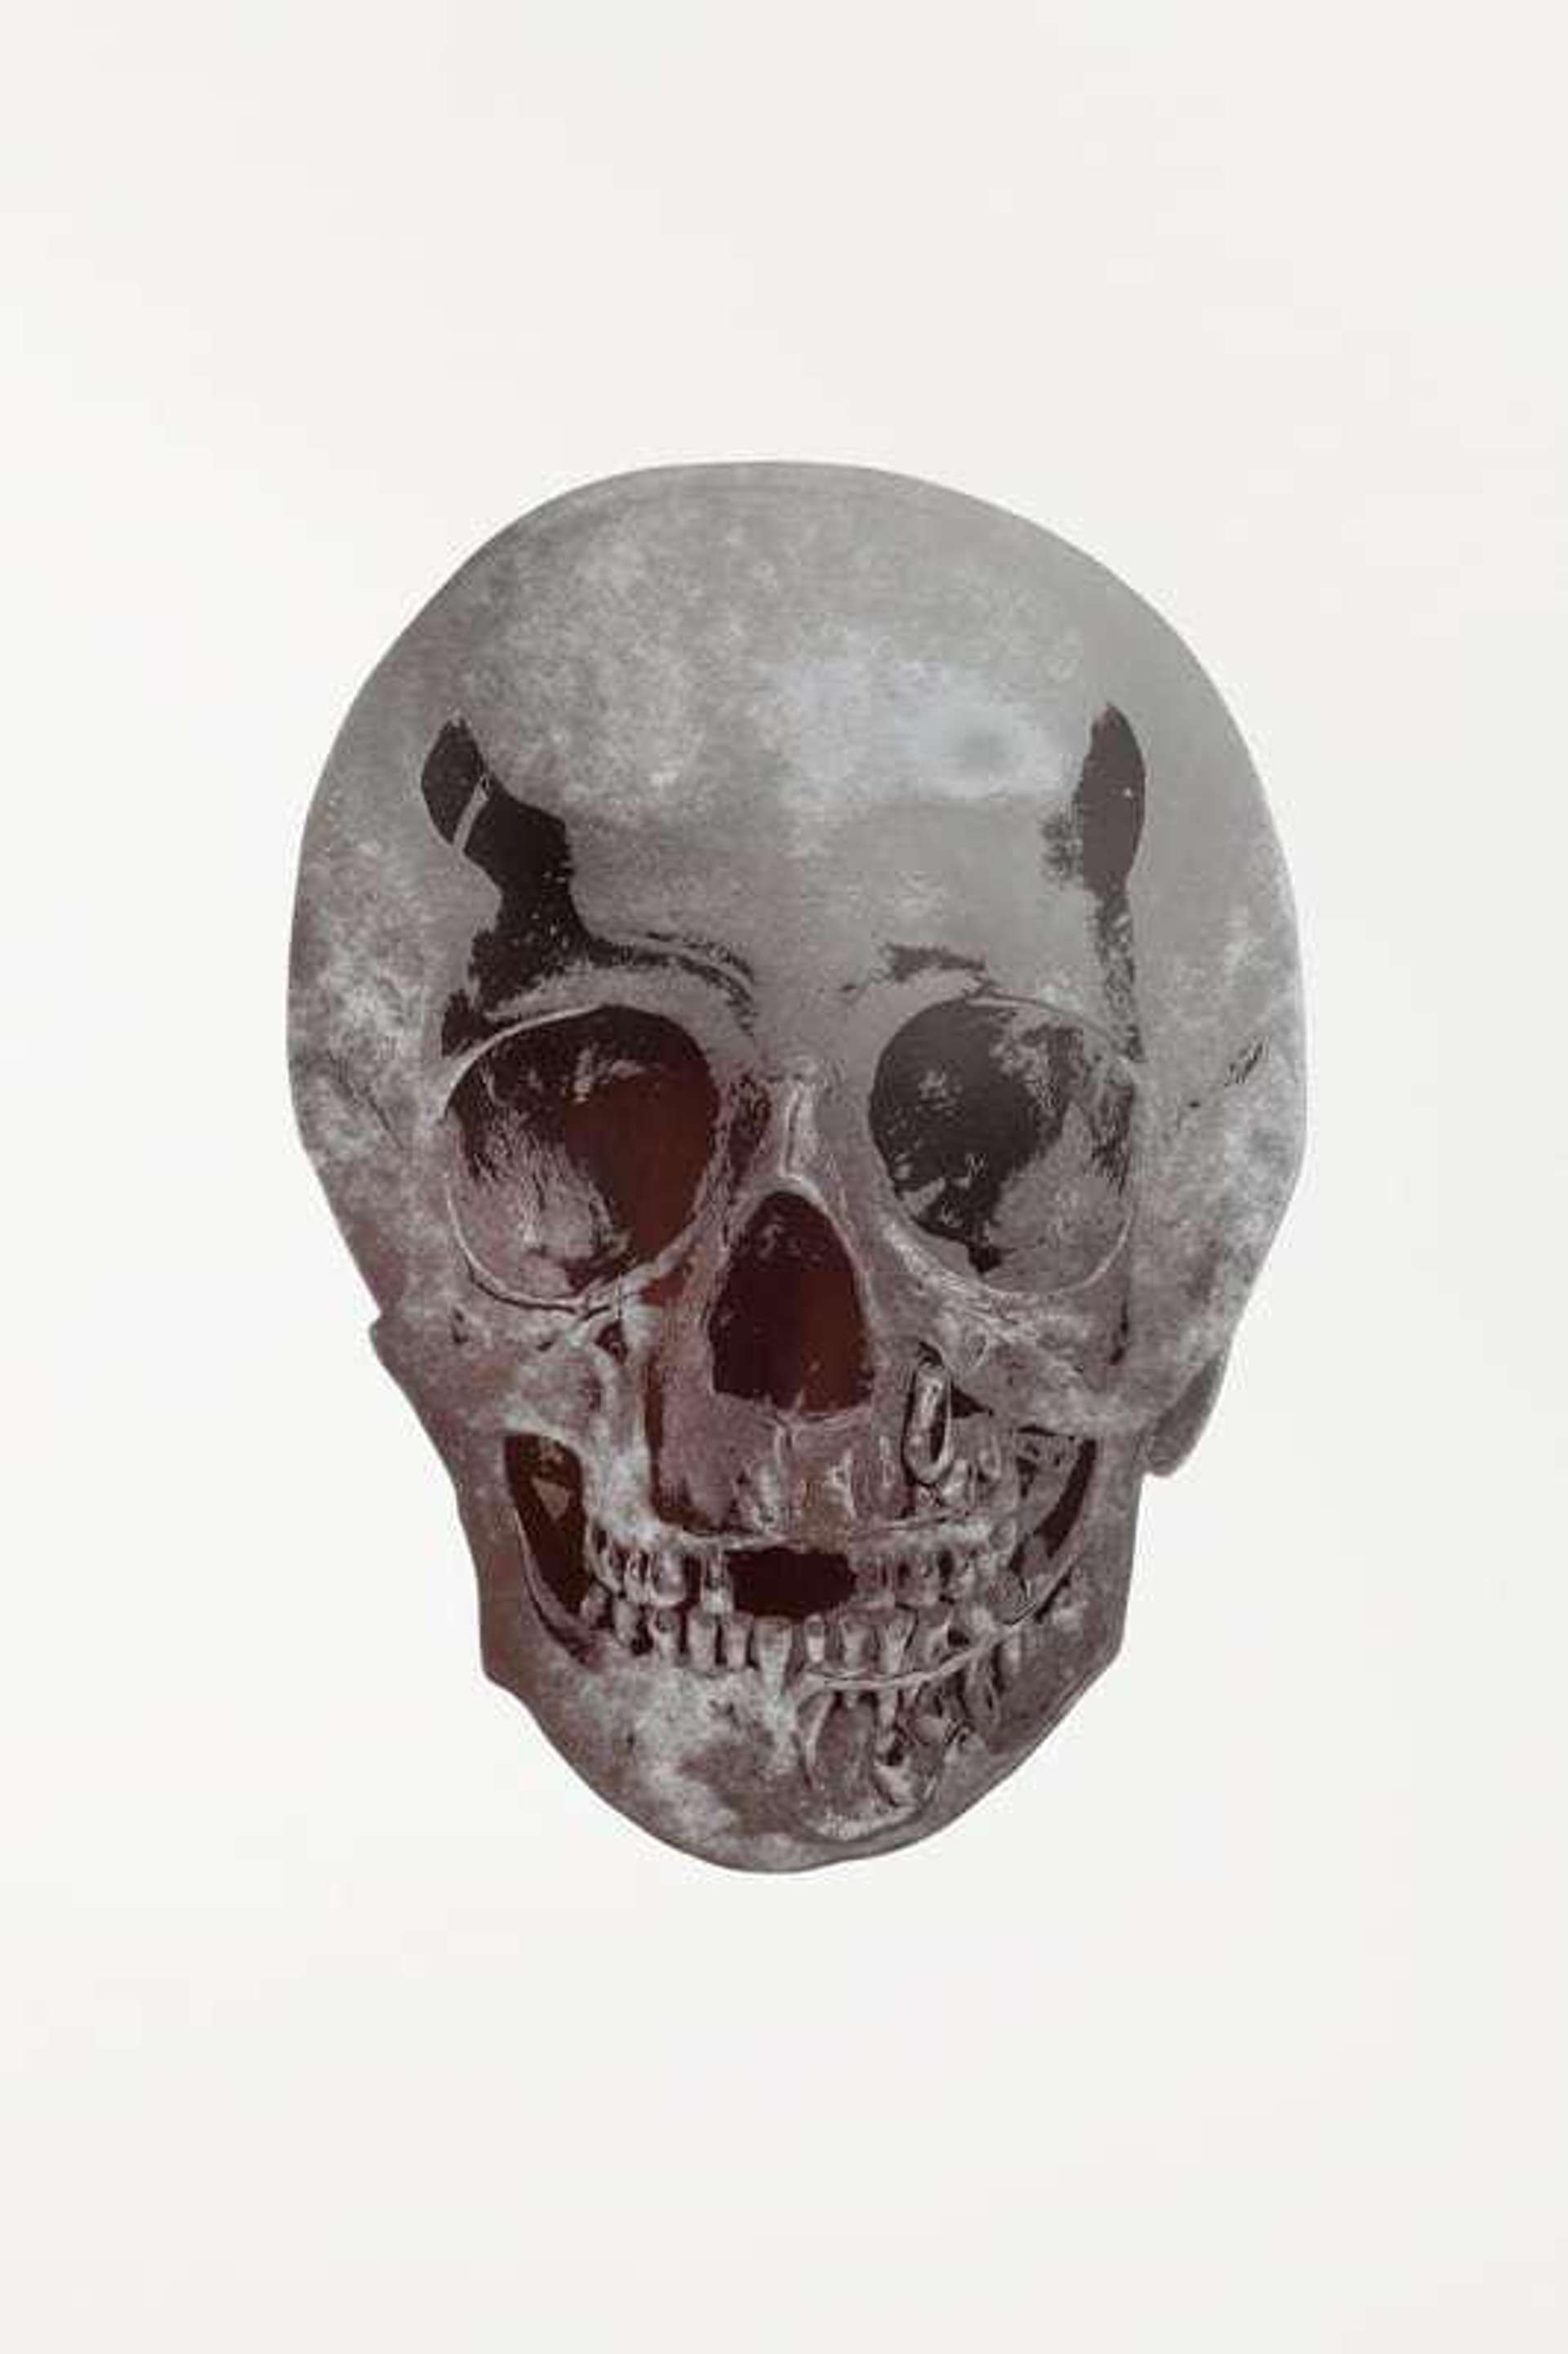 An image of the print The Dead by Damien Hirst. It shows a floating skull done using a mix of silver gloss and oriental gold set against a simple white backdrop.